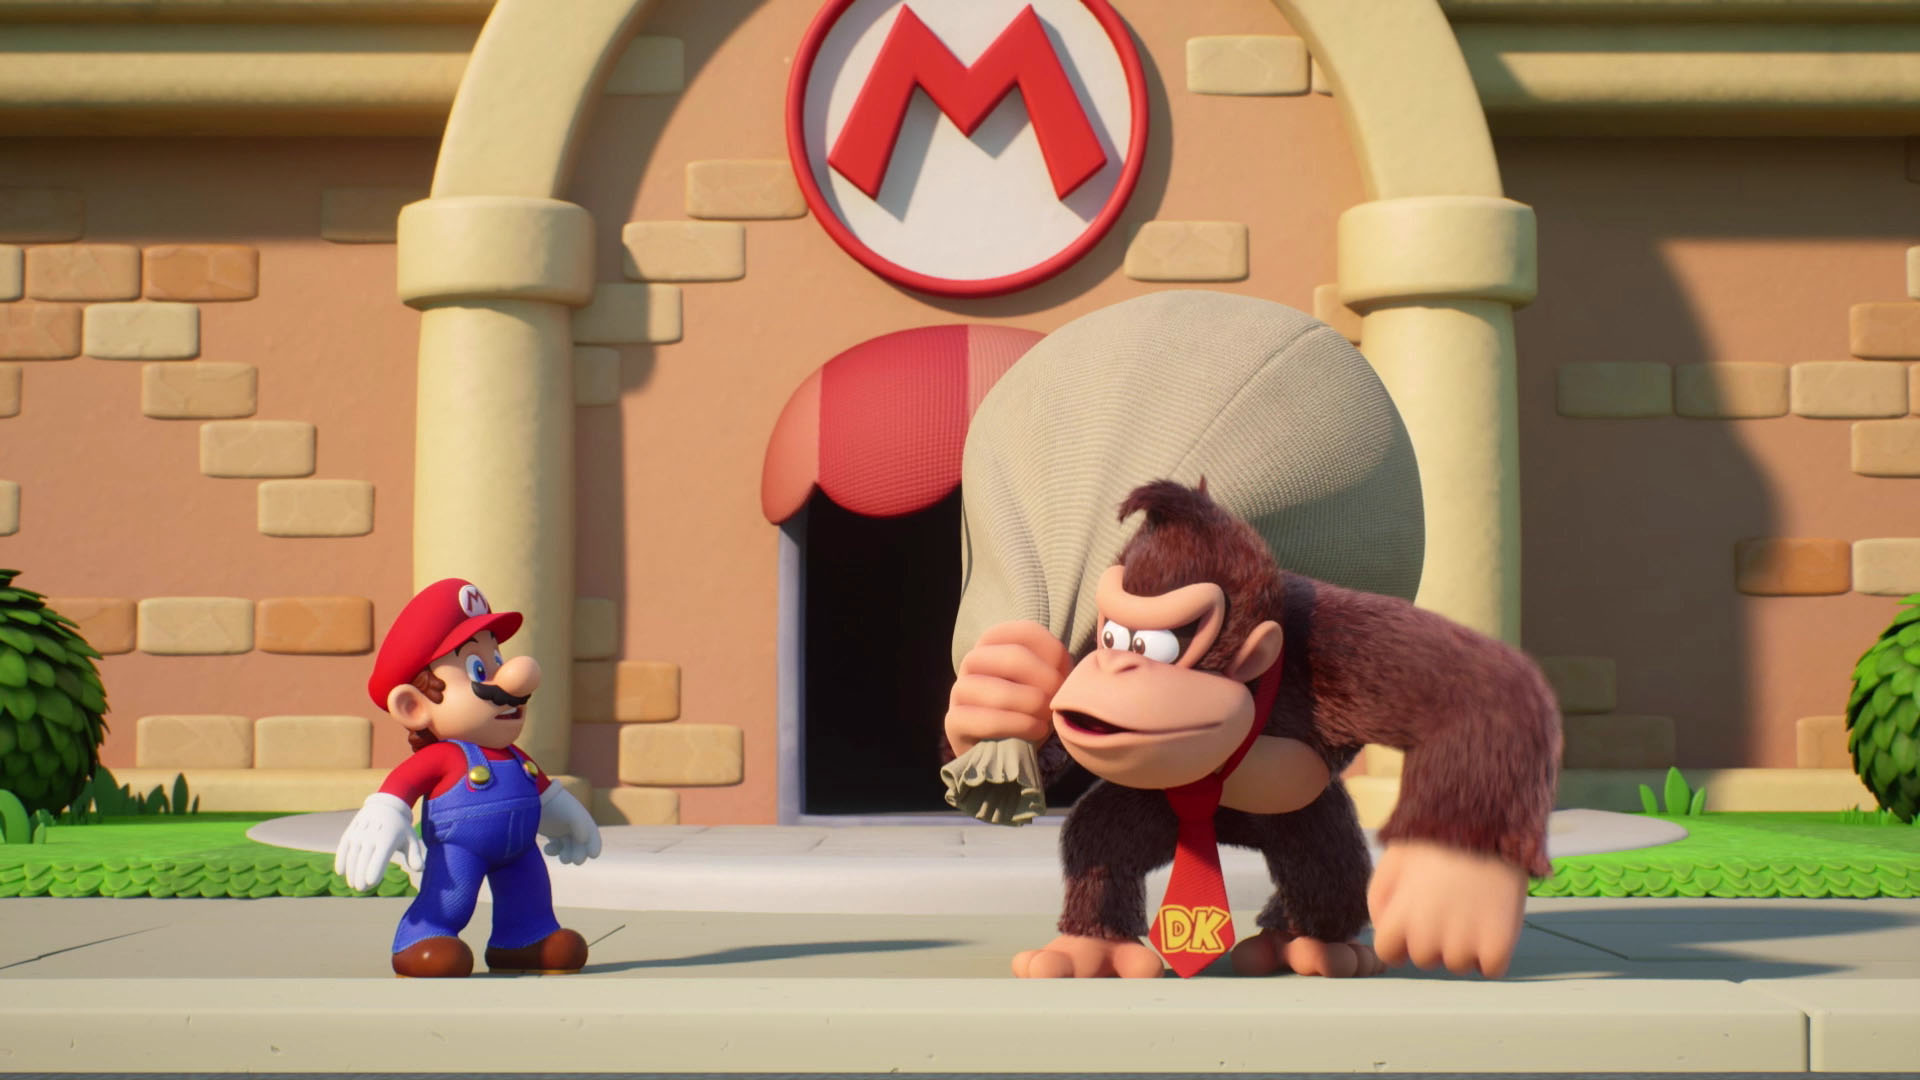 Mario vs. Donkey Kong Remake Announced for Switch